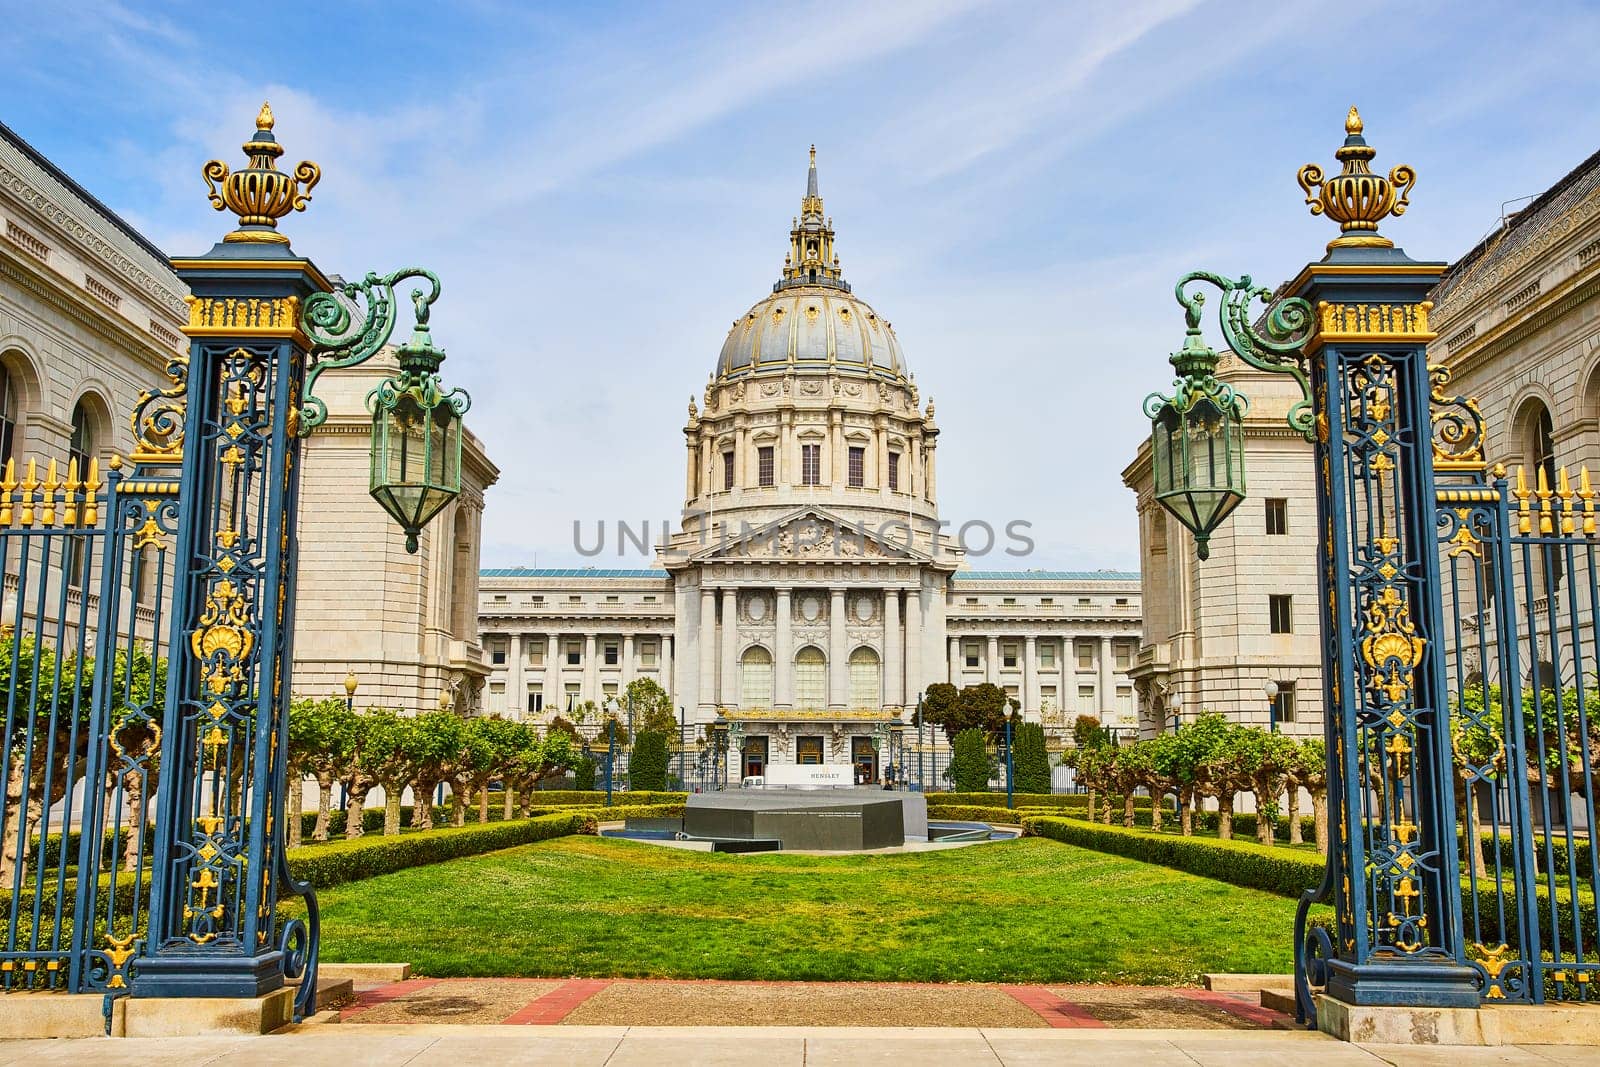 Image of San Francisco city hall memorial court with stone memorial view through gilded light posts